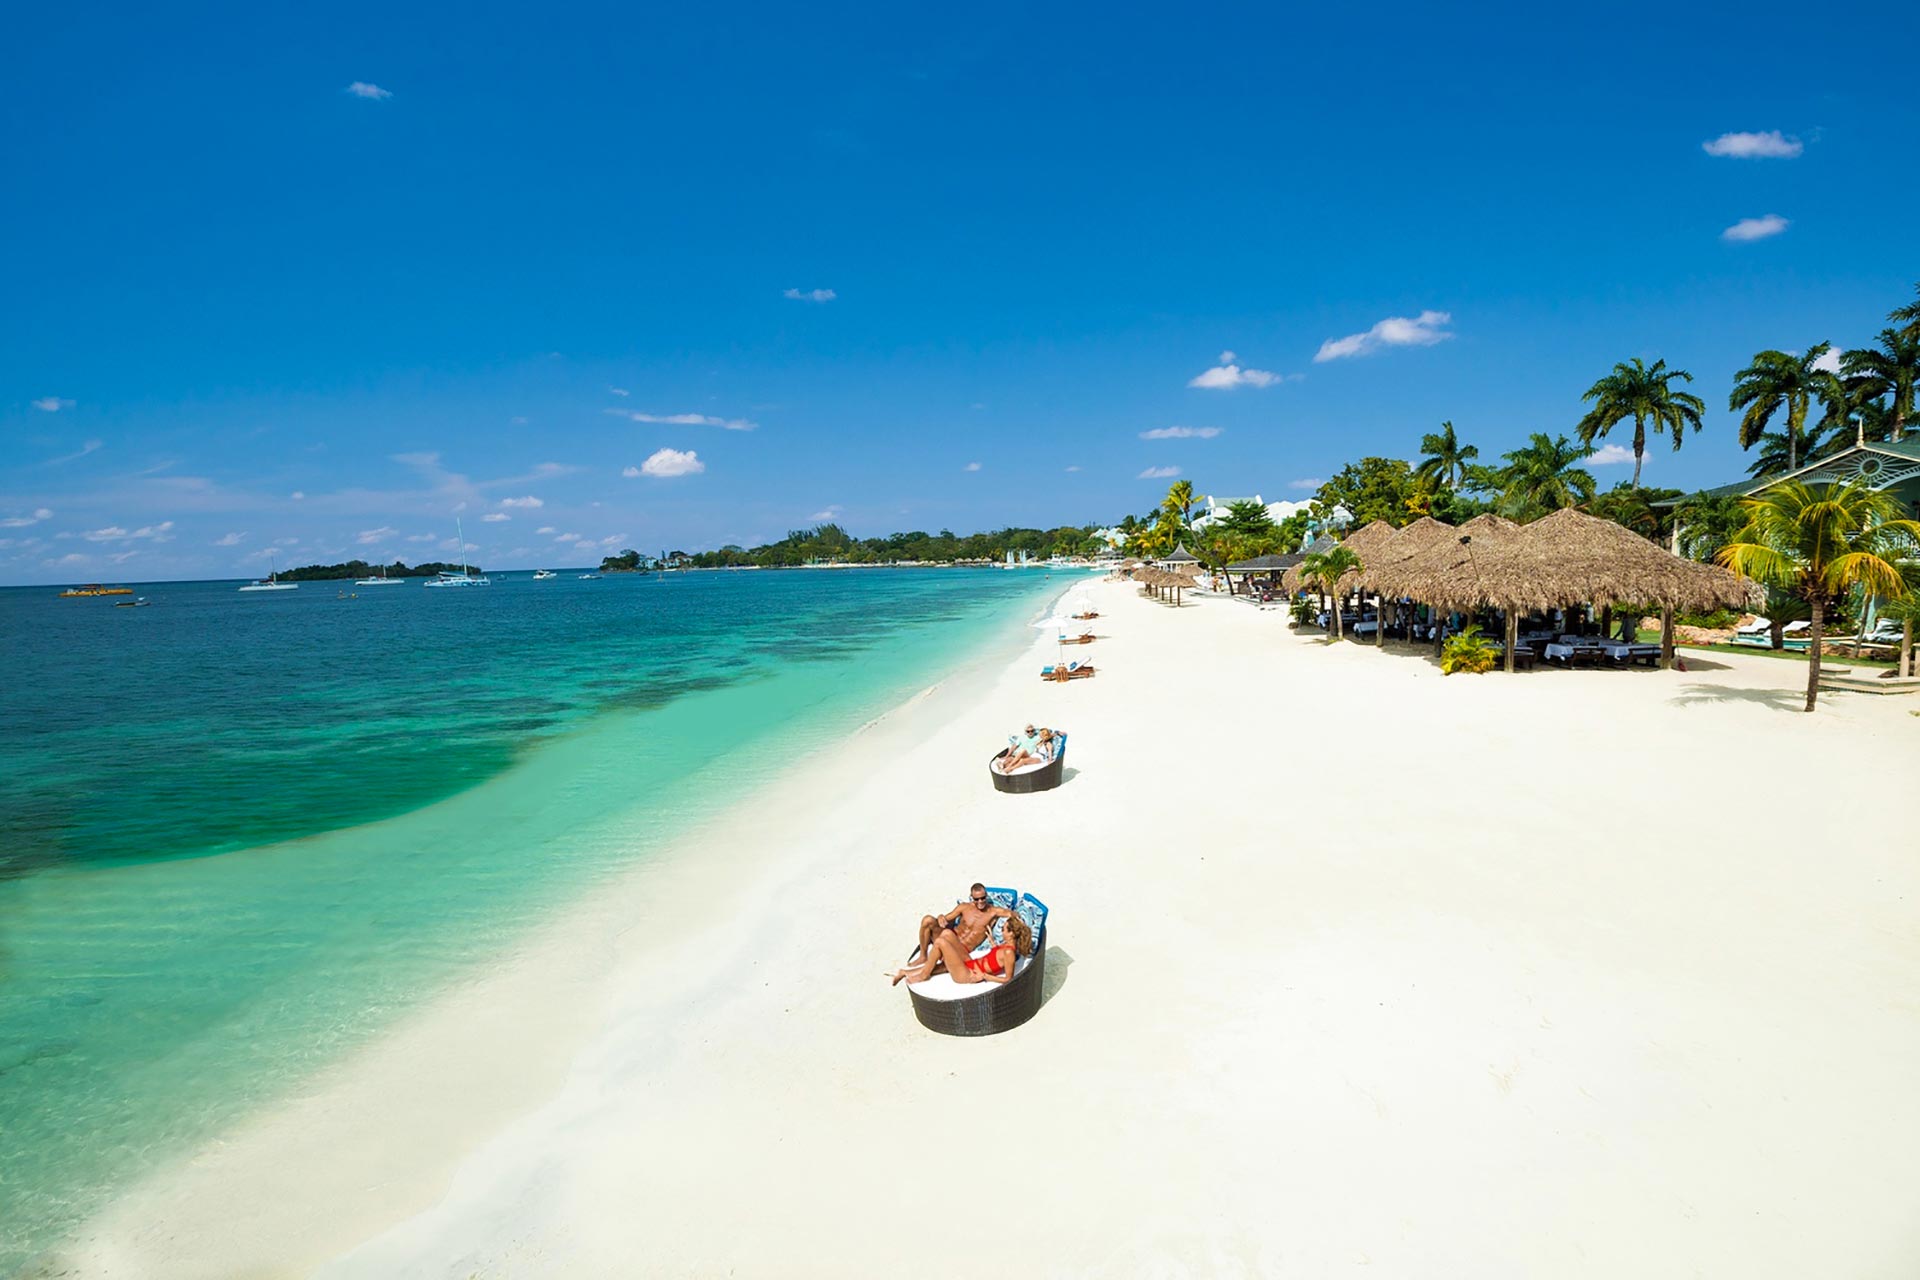 Sandals all-inclusive resort in Negril